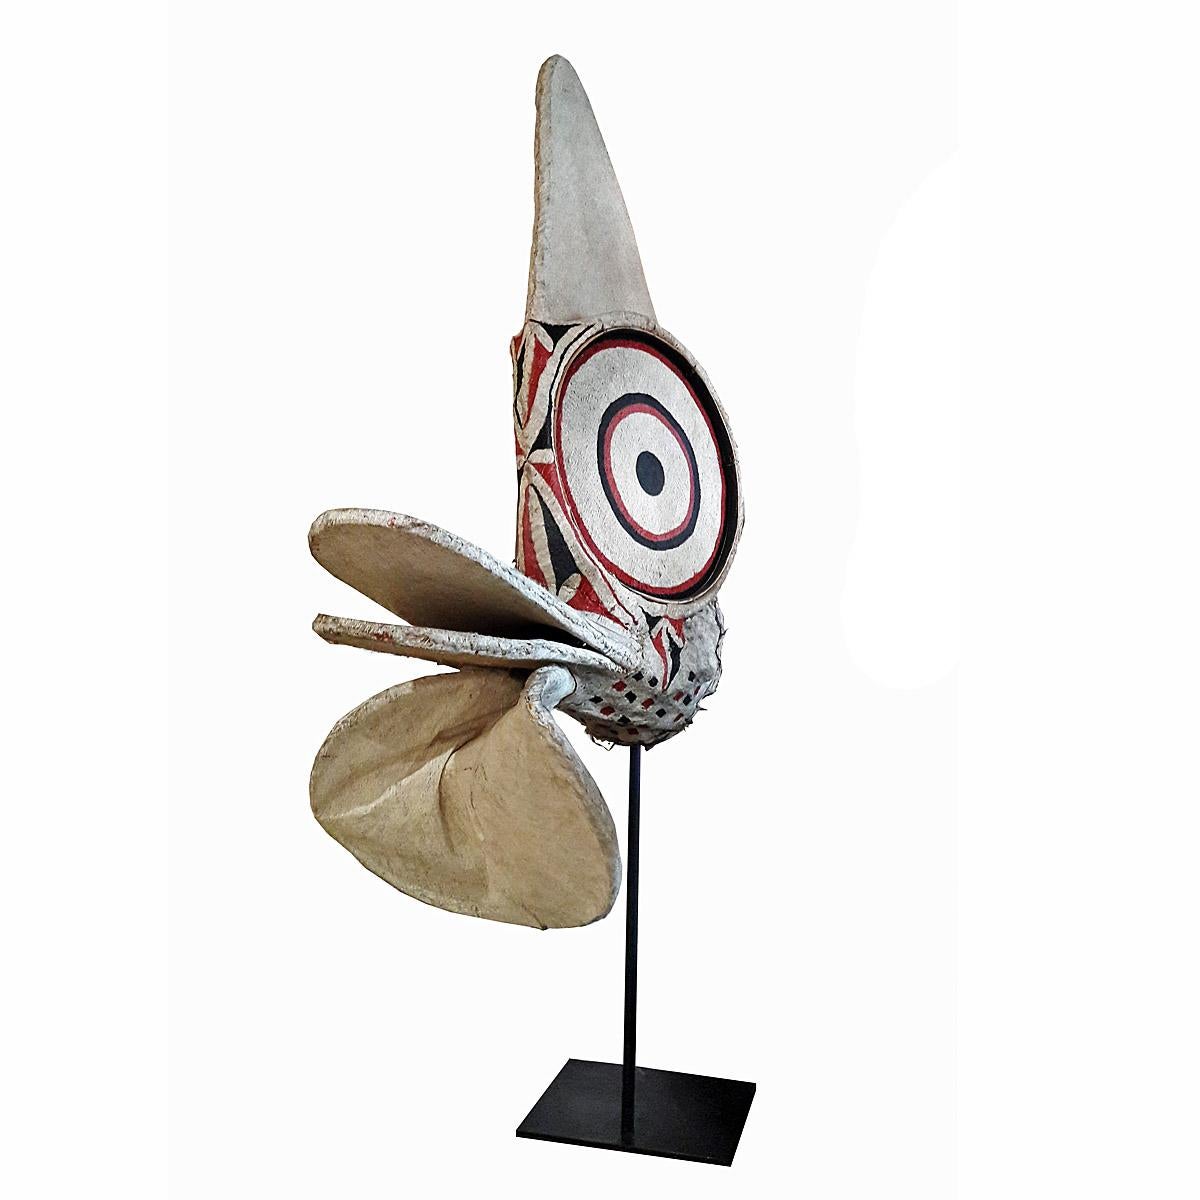 A Baining fire dance helmet mask (Kavat), late 20th century, Gazelle Peninsula, East New Britain Province, Papua New Guinea, Melanesia. Made out of bark cloth, bamboo cane, pigment and raffia. Mounted on a black metal stand.

Of the many subgroups